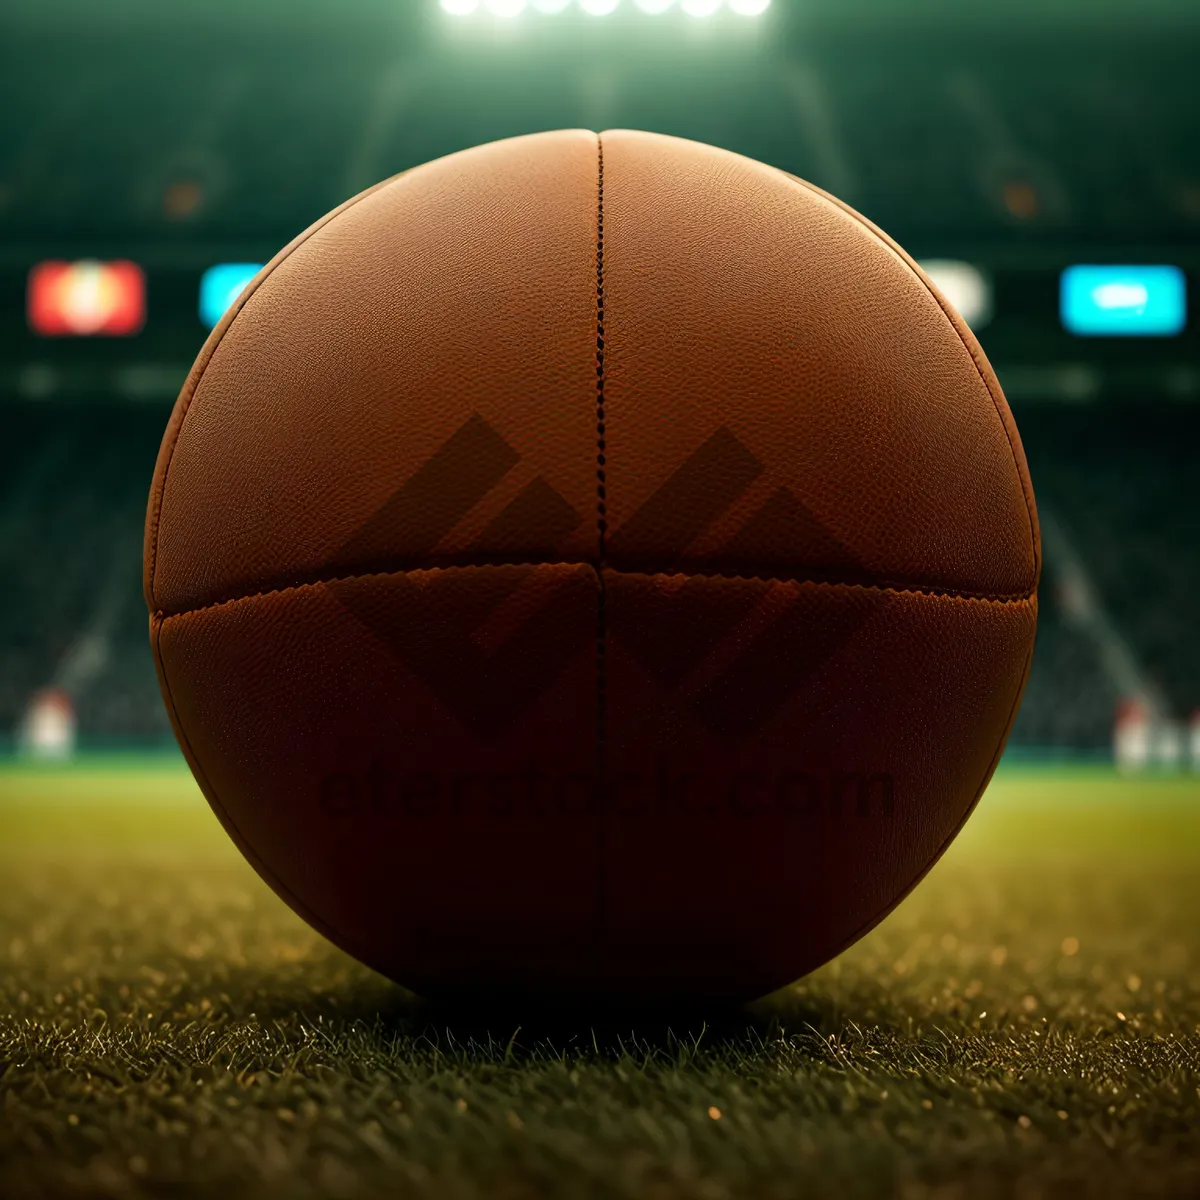 Picture of Sports Equipment: Basketball and Soccer Ball